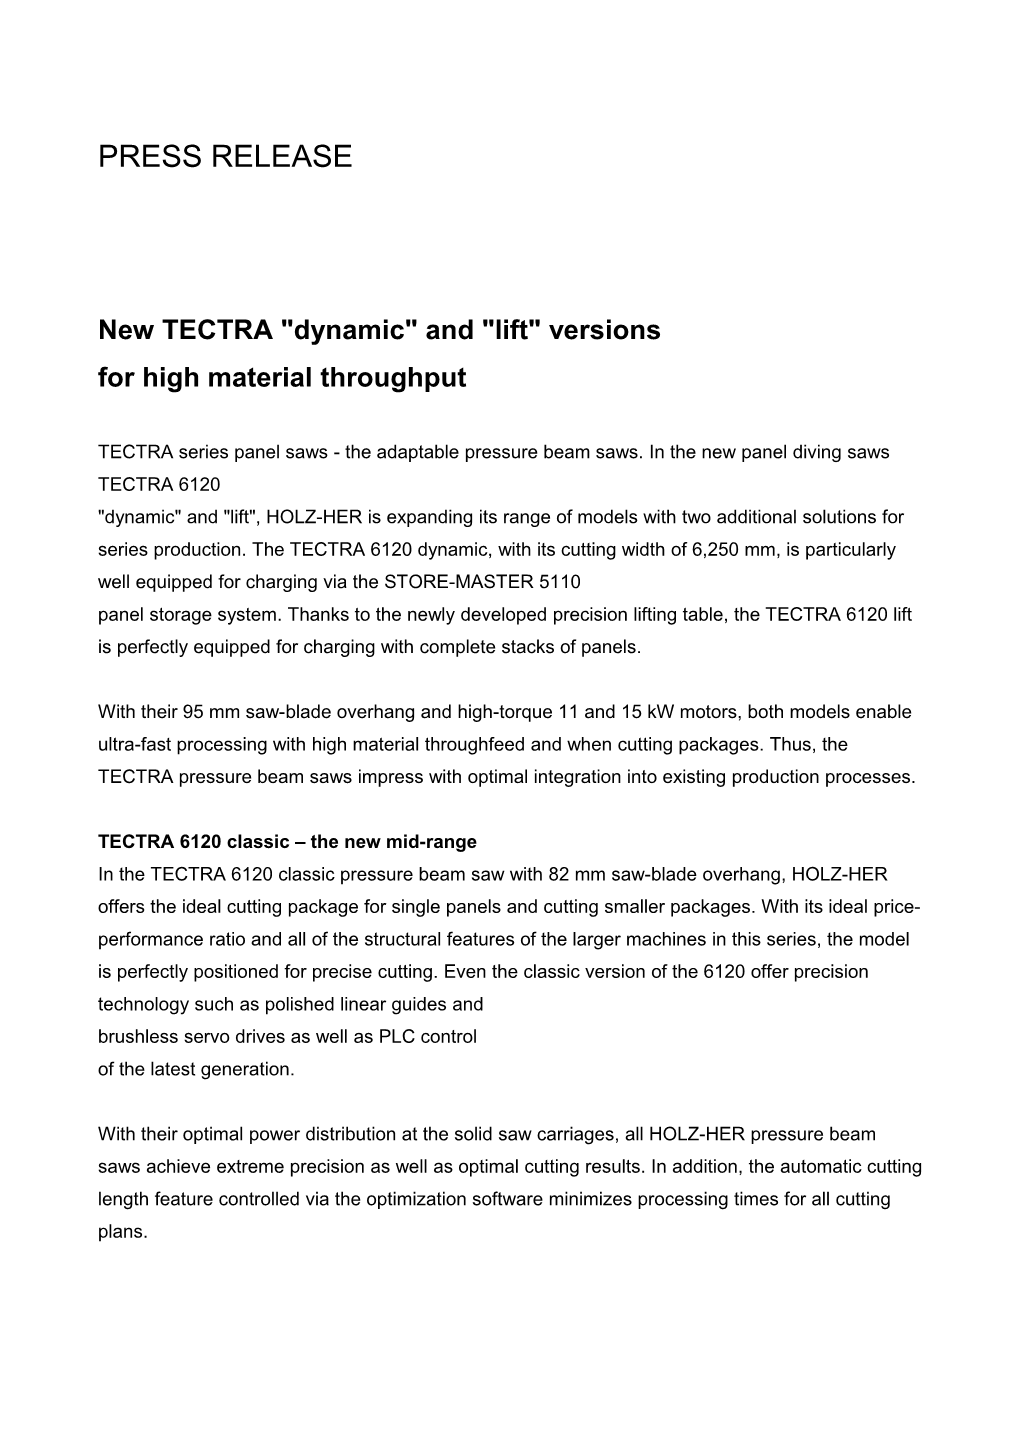 New TECTRA Dynamic and Lift Versions